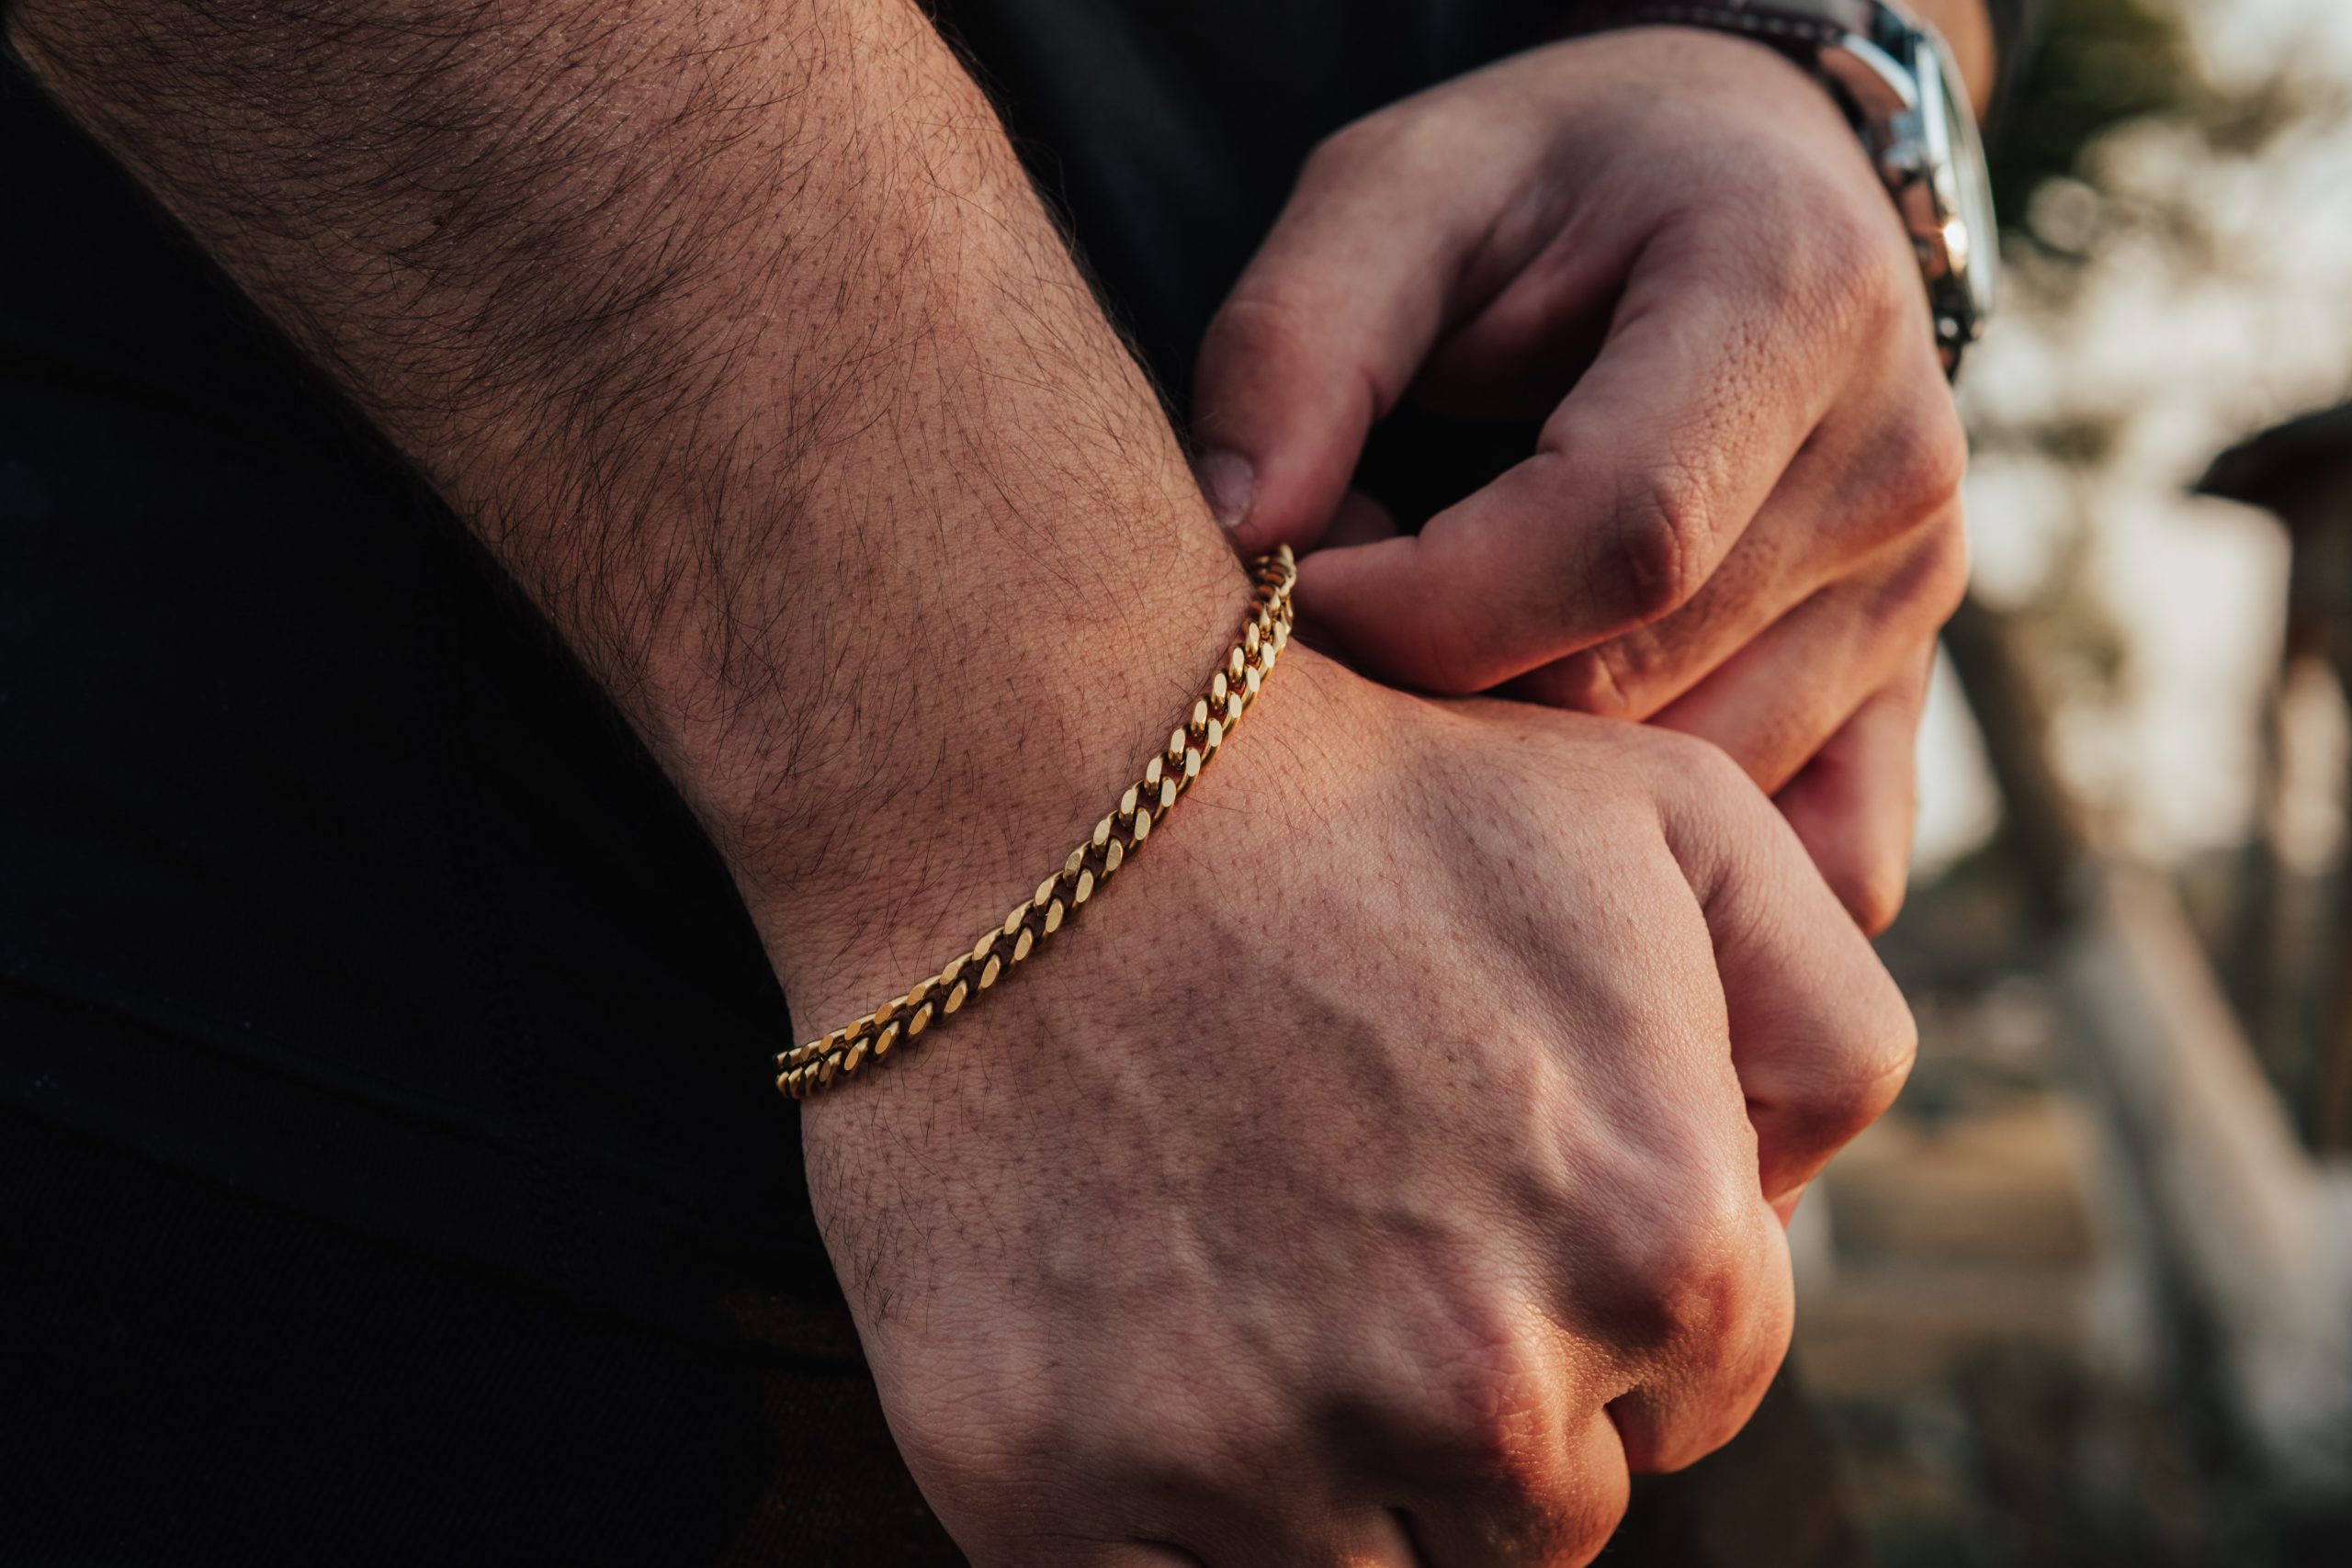 Why the most Cuban link chains and bracelets are so popular